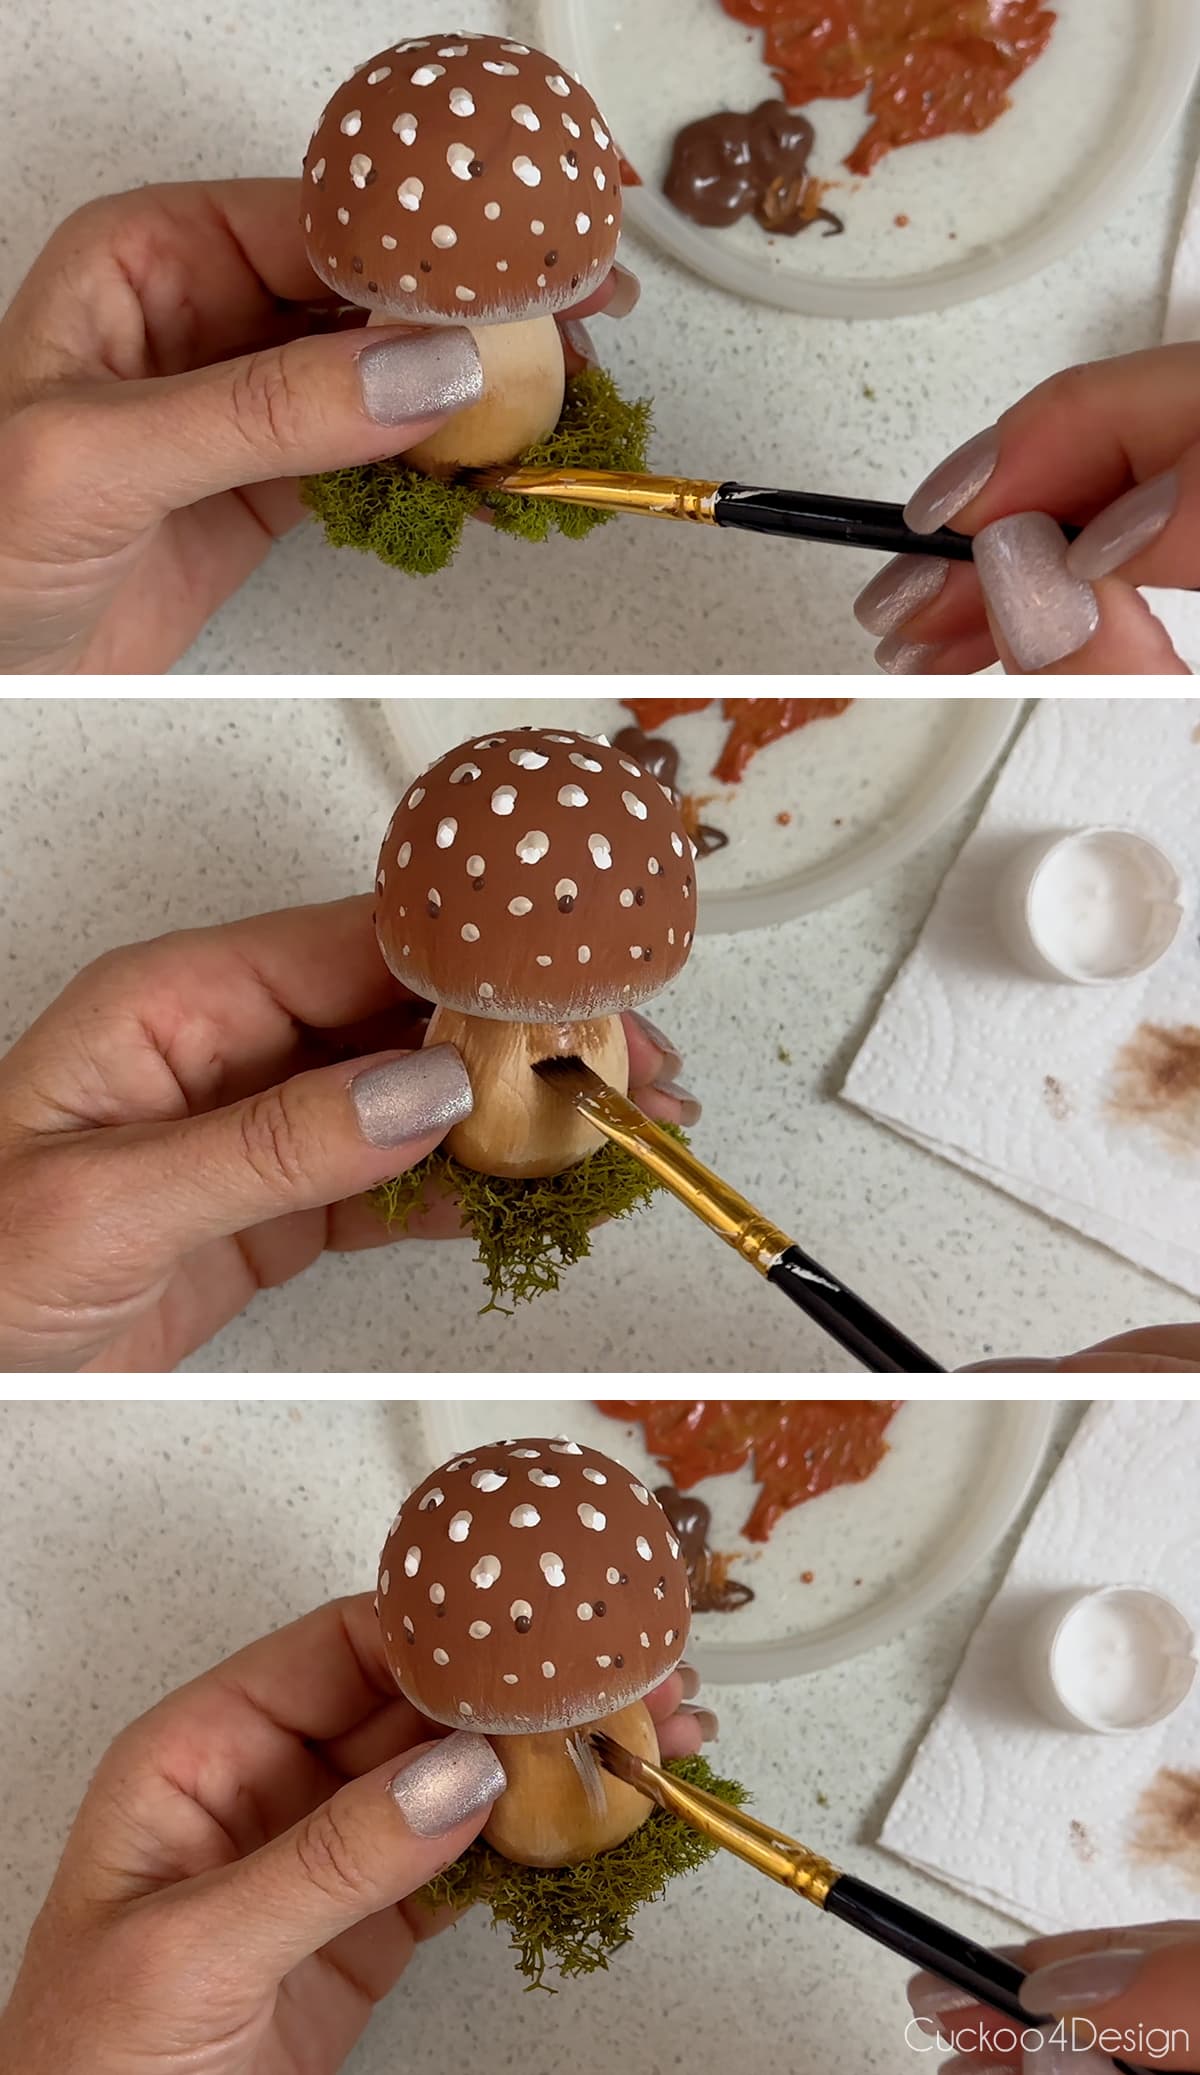 painting the mushroom stem with brown and ivory paint